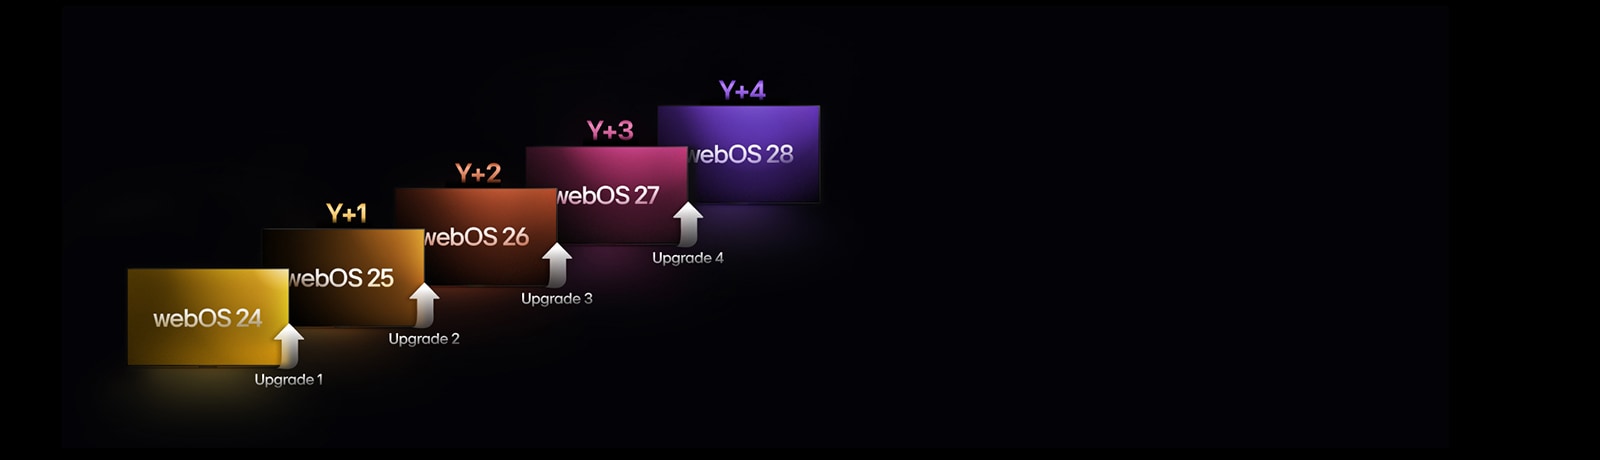 Five rectangles in different colors are staggered upwards, each labeled with a year from "webOS 24" to "webOS 28". Upward-pointing arrows are between the rectangles, labeled from "Upgrade 1" to "Upgrade 4".